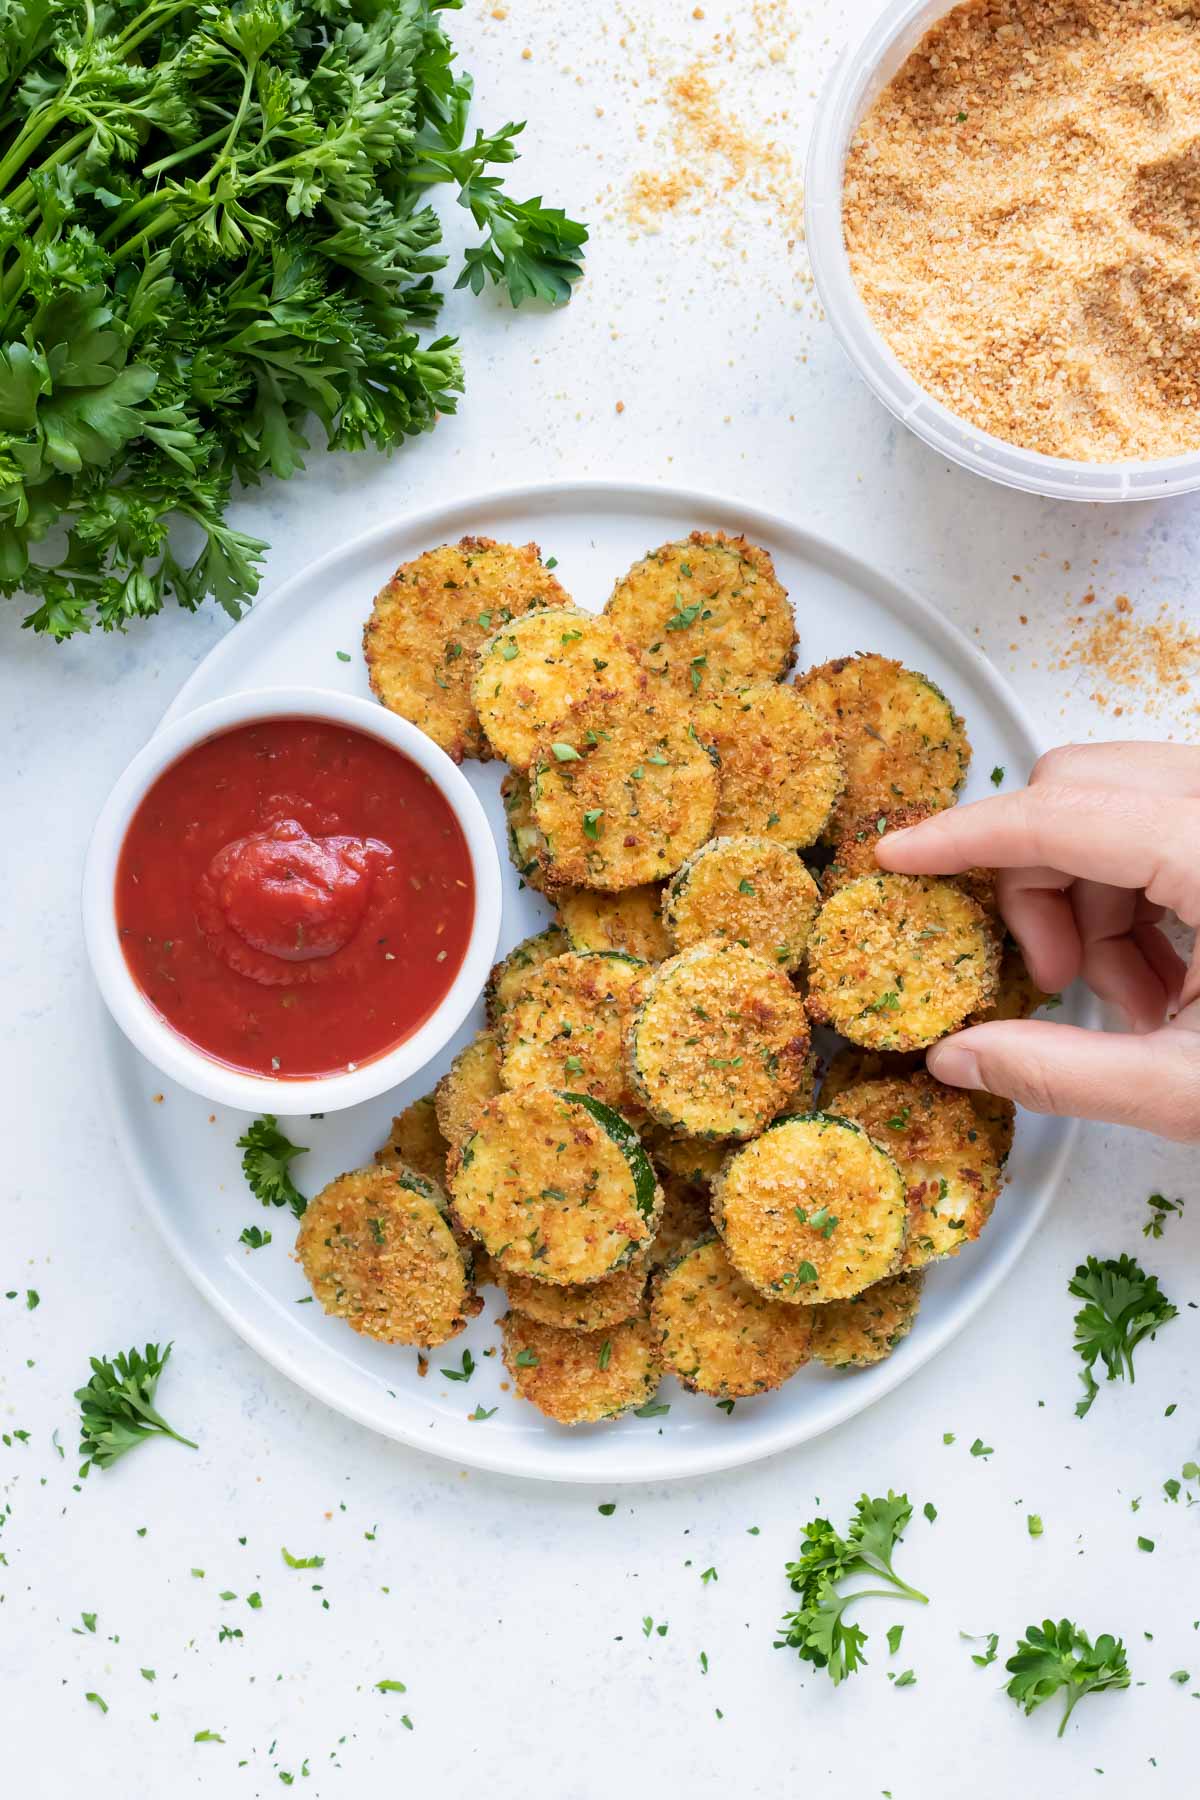 Zucchini chips are lifted up by a hand for a healthy fried appetizer.